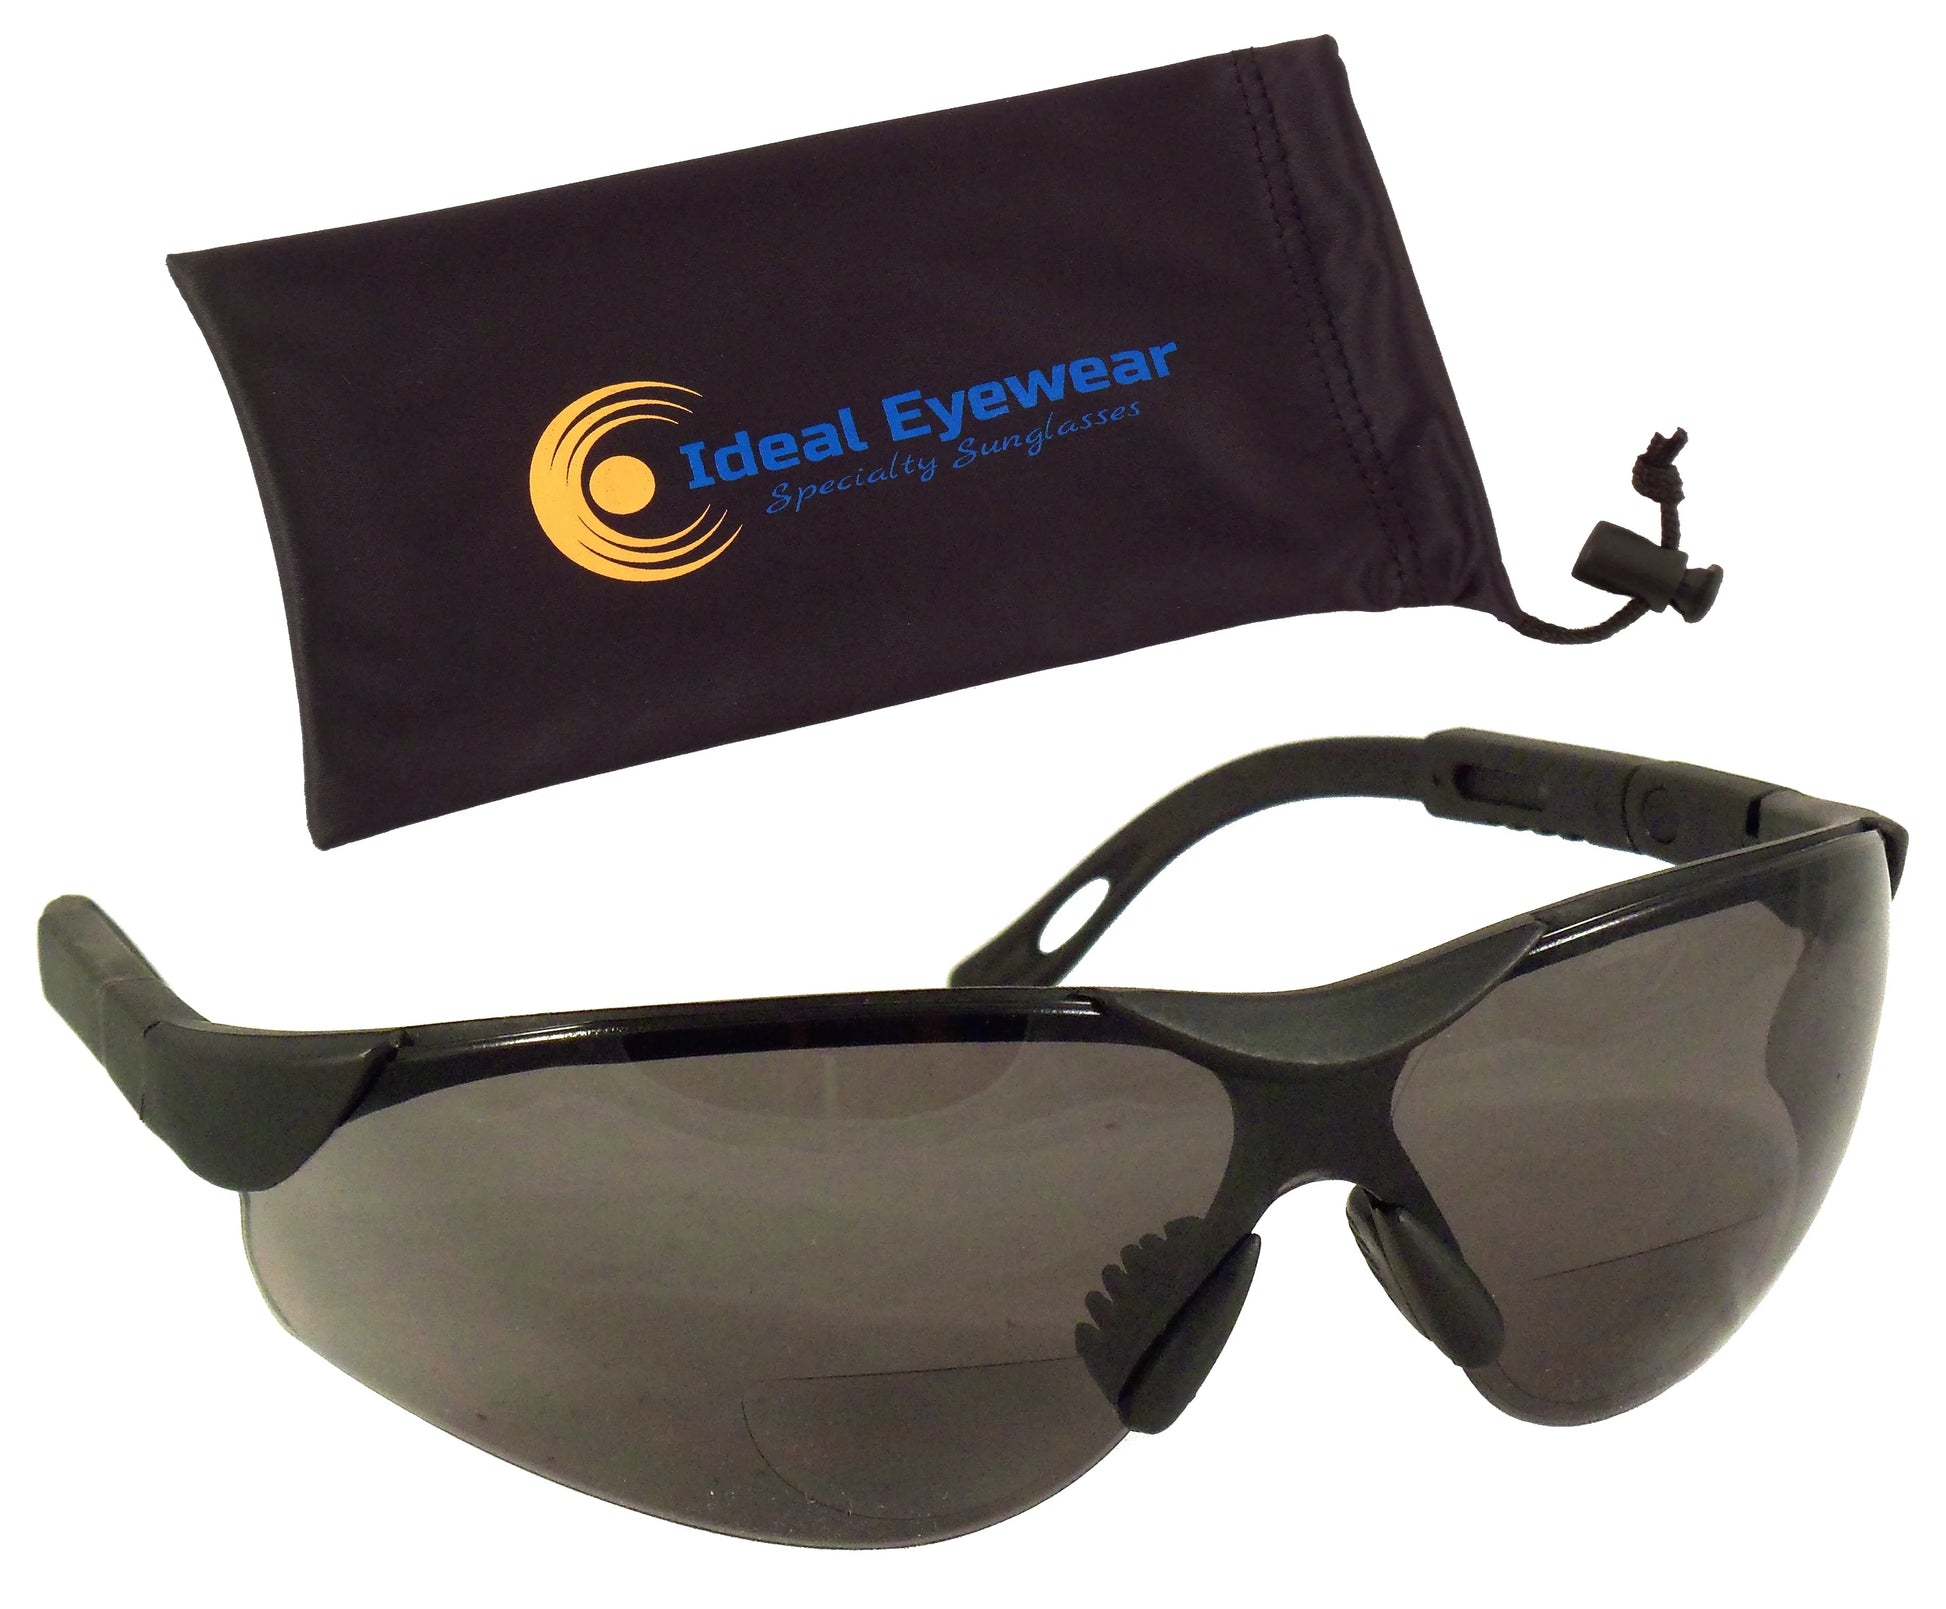 Bifocal Safety Glasses with Adjustable Temples - Bifocal Sunglasses - Safety Sunglasses - ANSI Z87.1 - UV400 - Ideal Eyewear